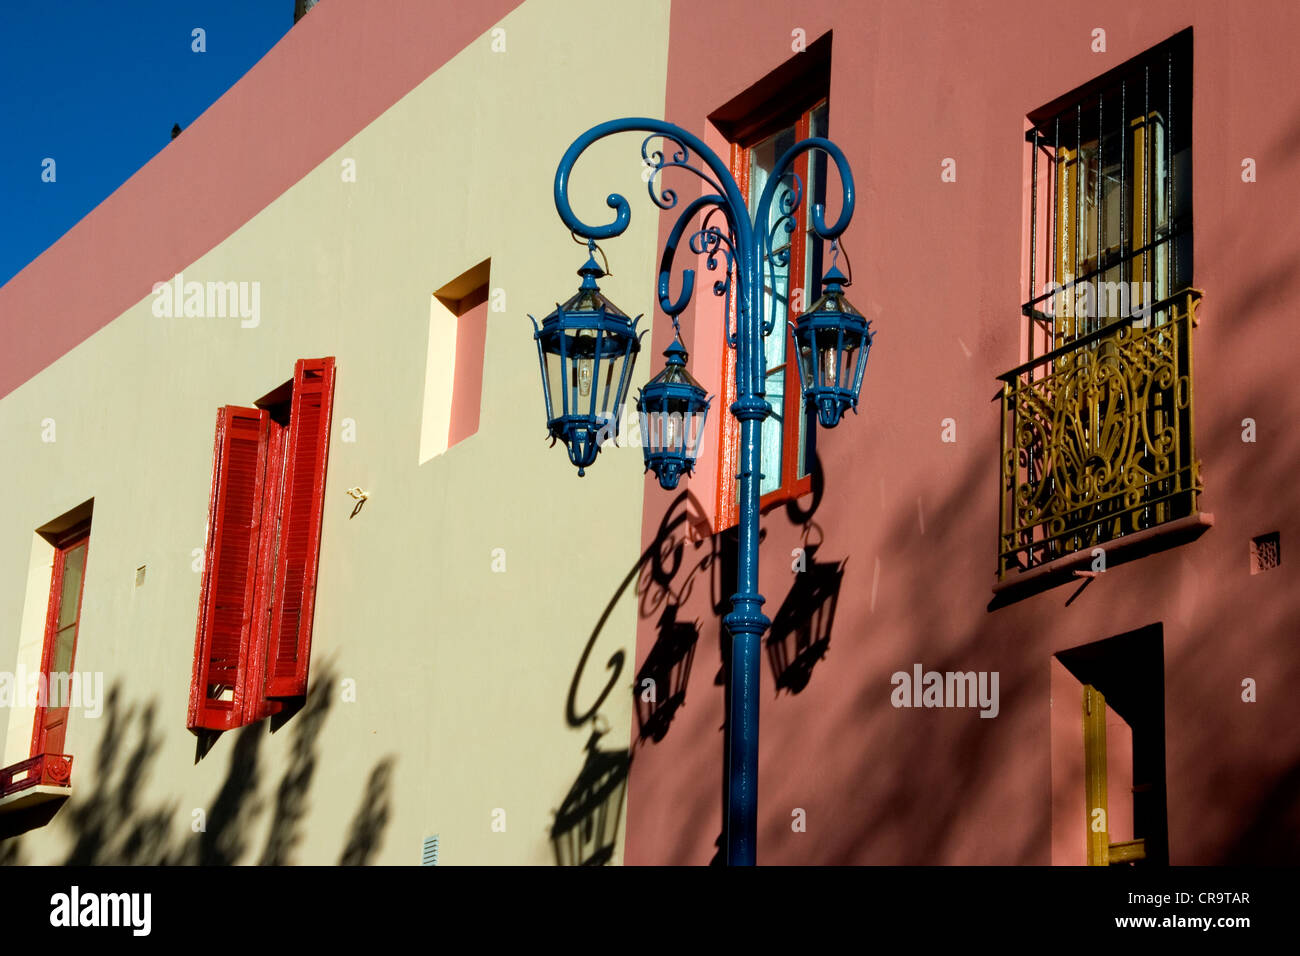 Shadows on the painted walls of the La boca neighborhood of Buenos Aires, Argentina. Stock Photo